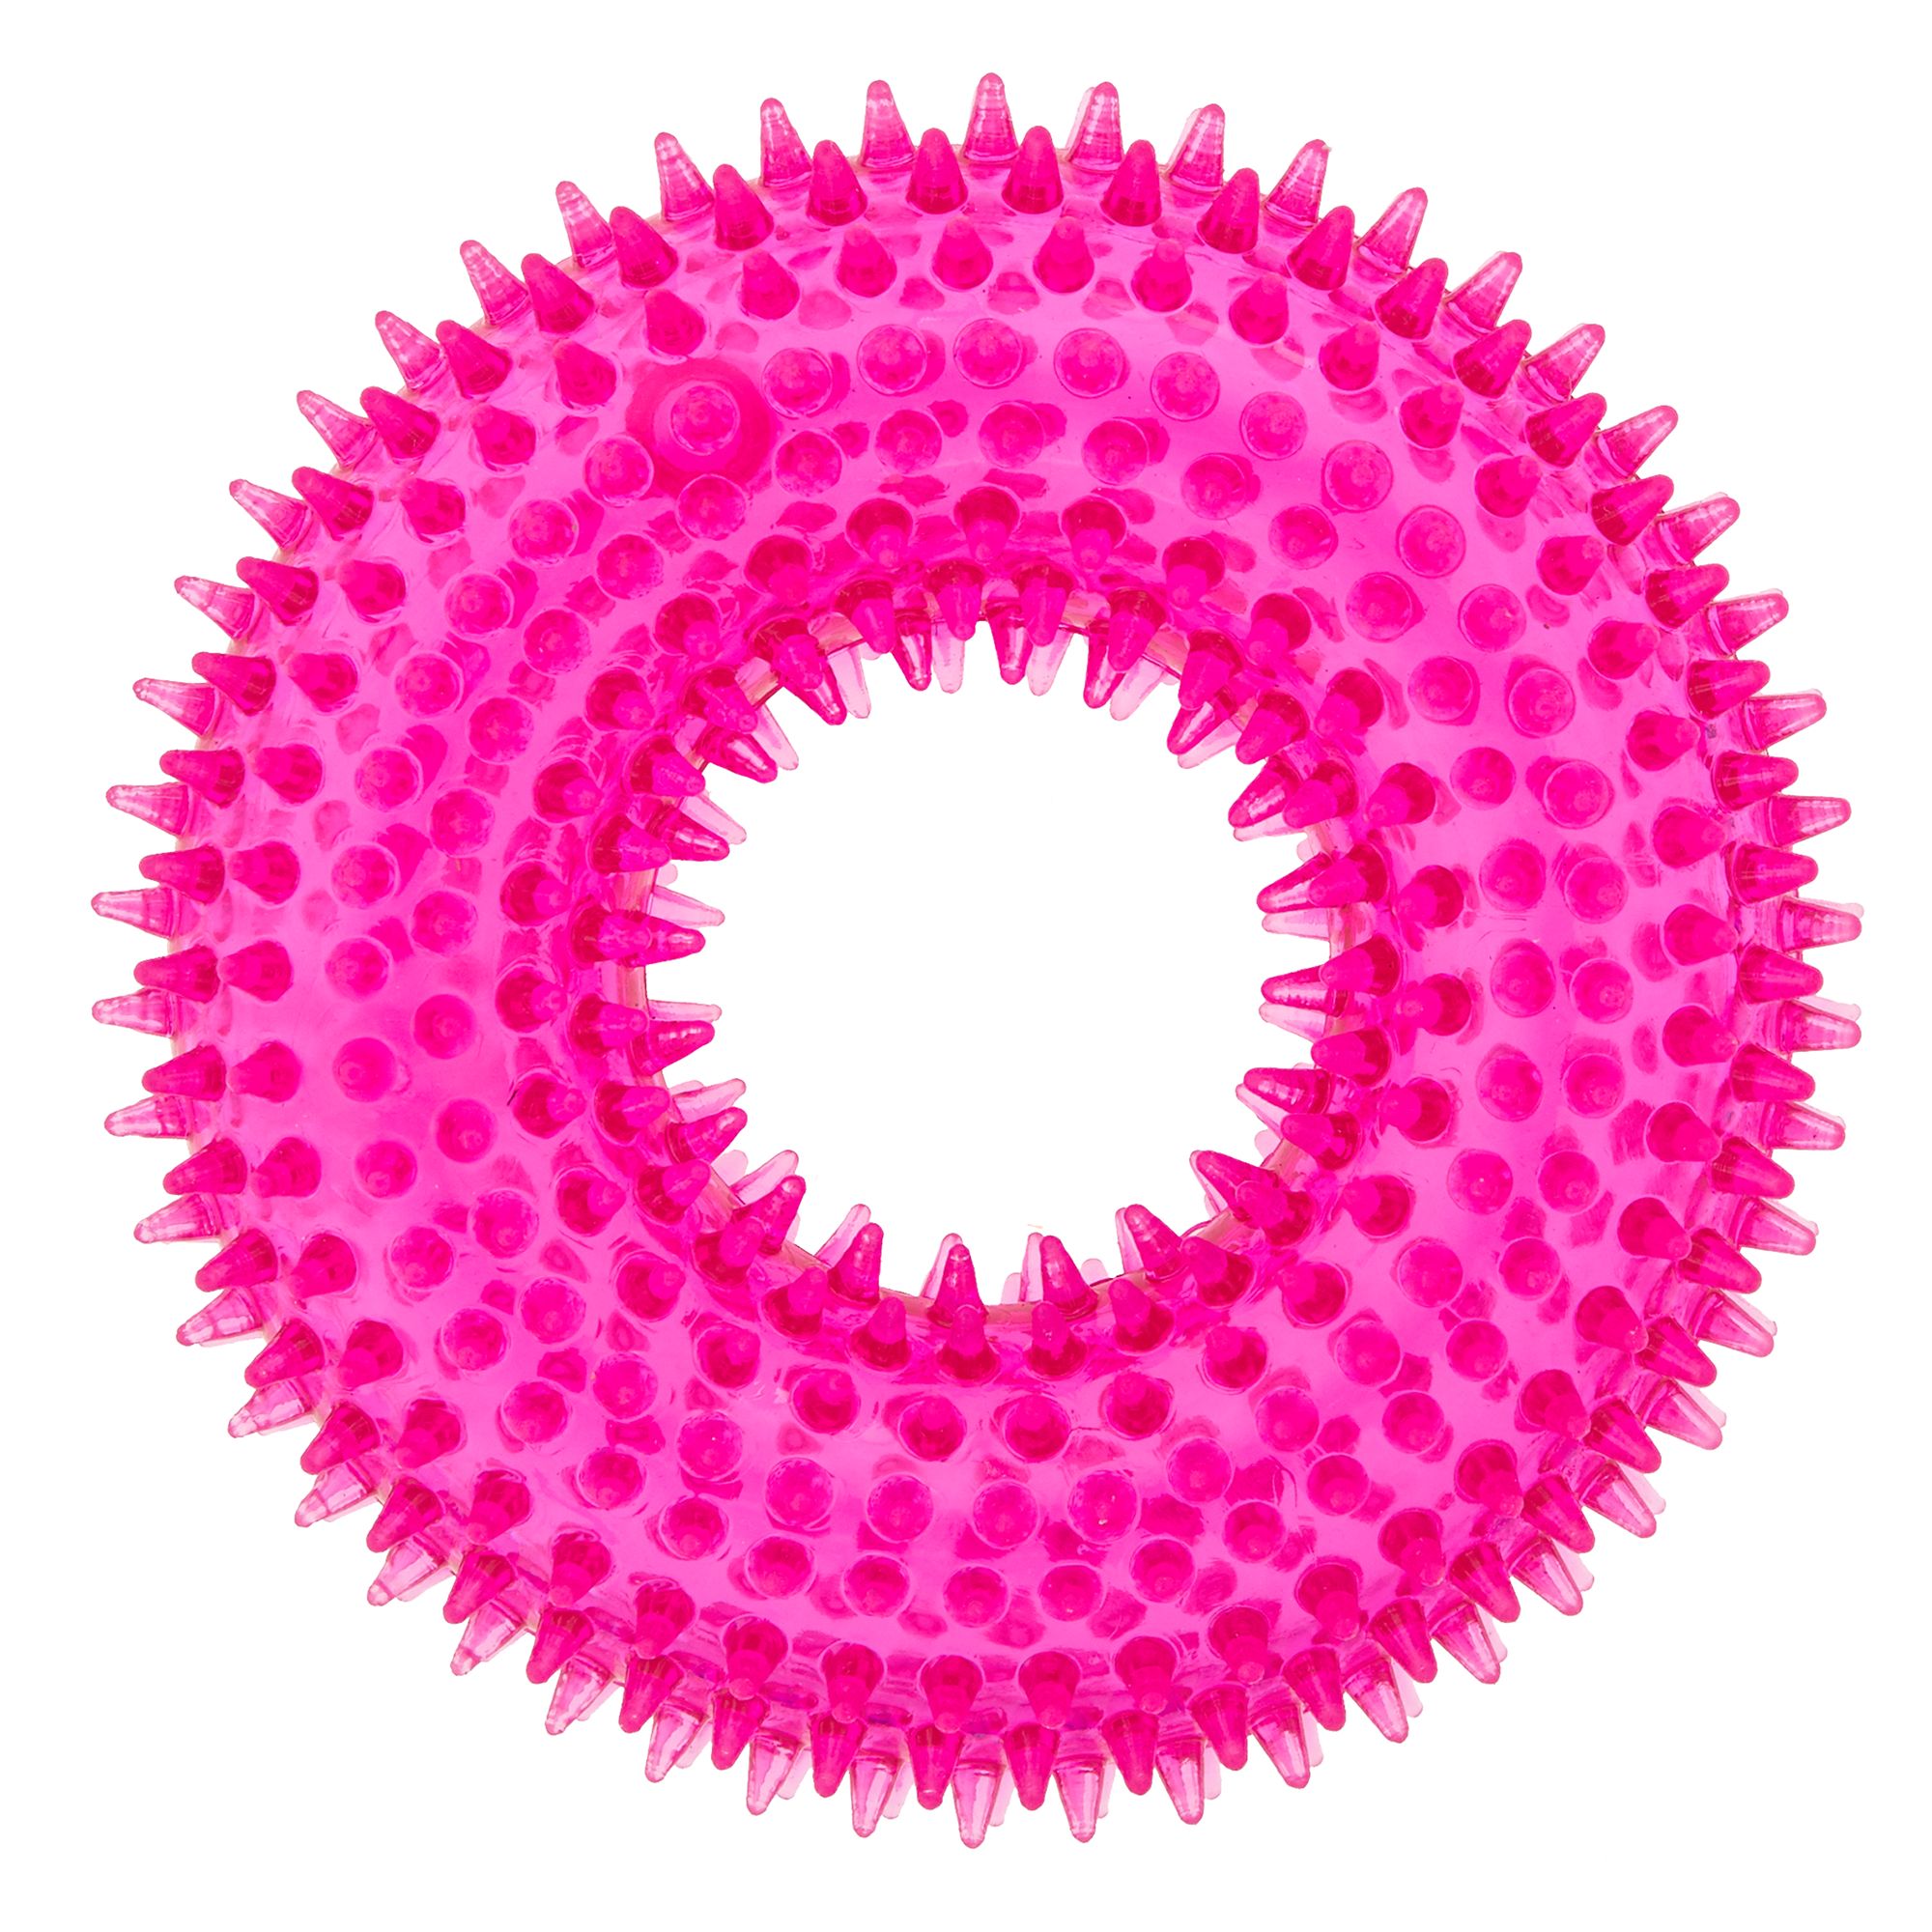 Top Paw® Spike Ring Dog Toy - Squeaker 